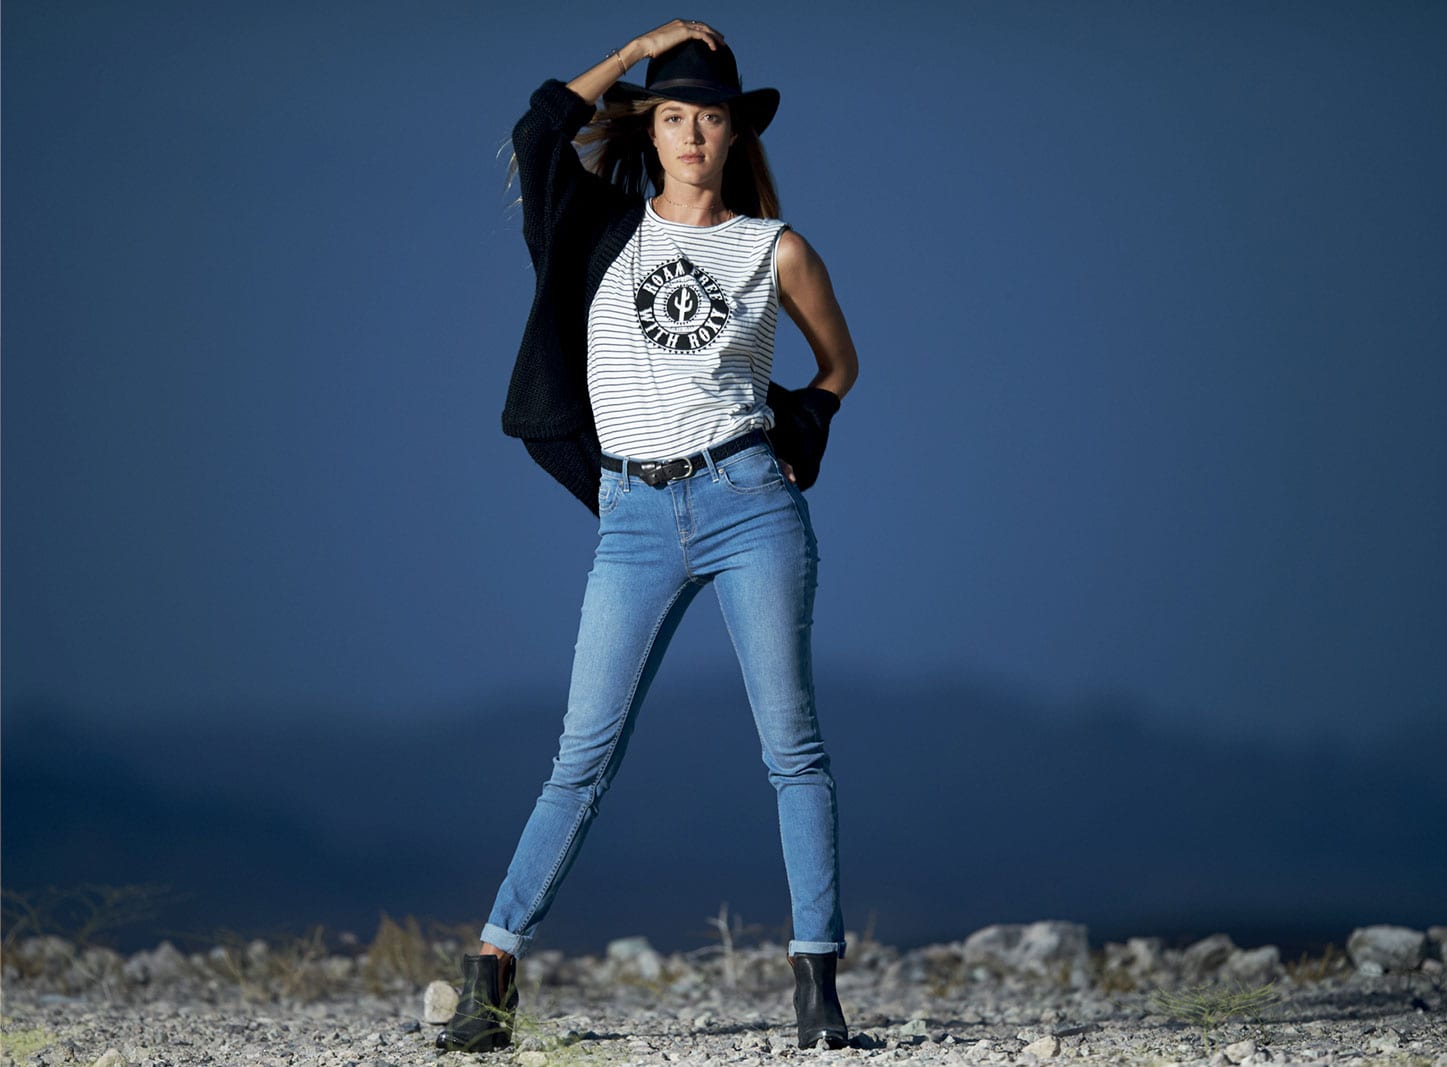 Woman wearing white sando shirt and jeans with black hat and black shoes